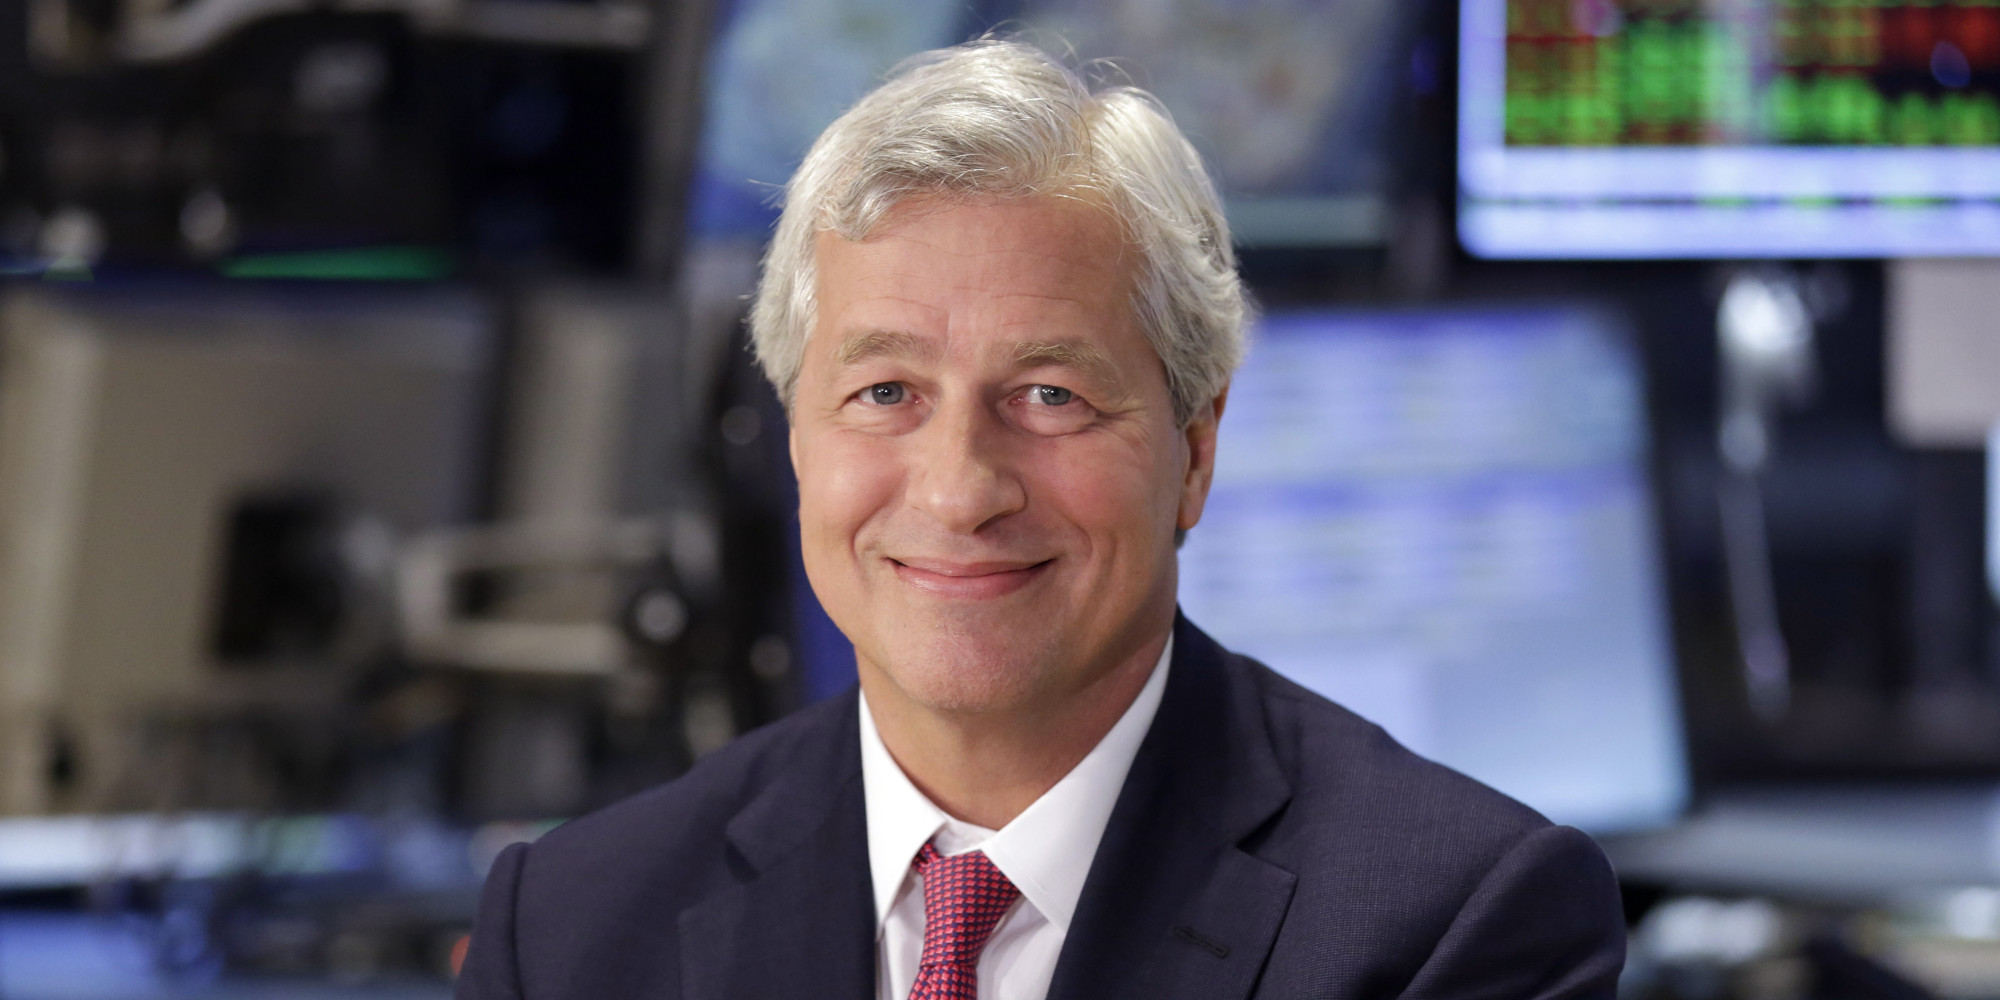 Jamie Dimon's Bitcoin Statements Reported as Market Abuse in Sweden